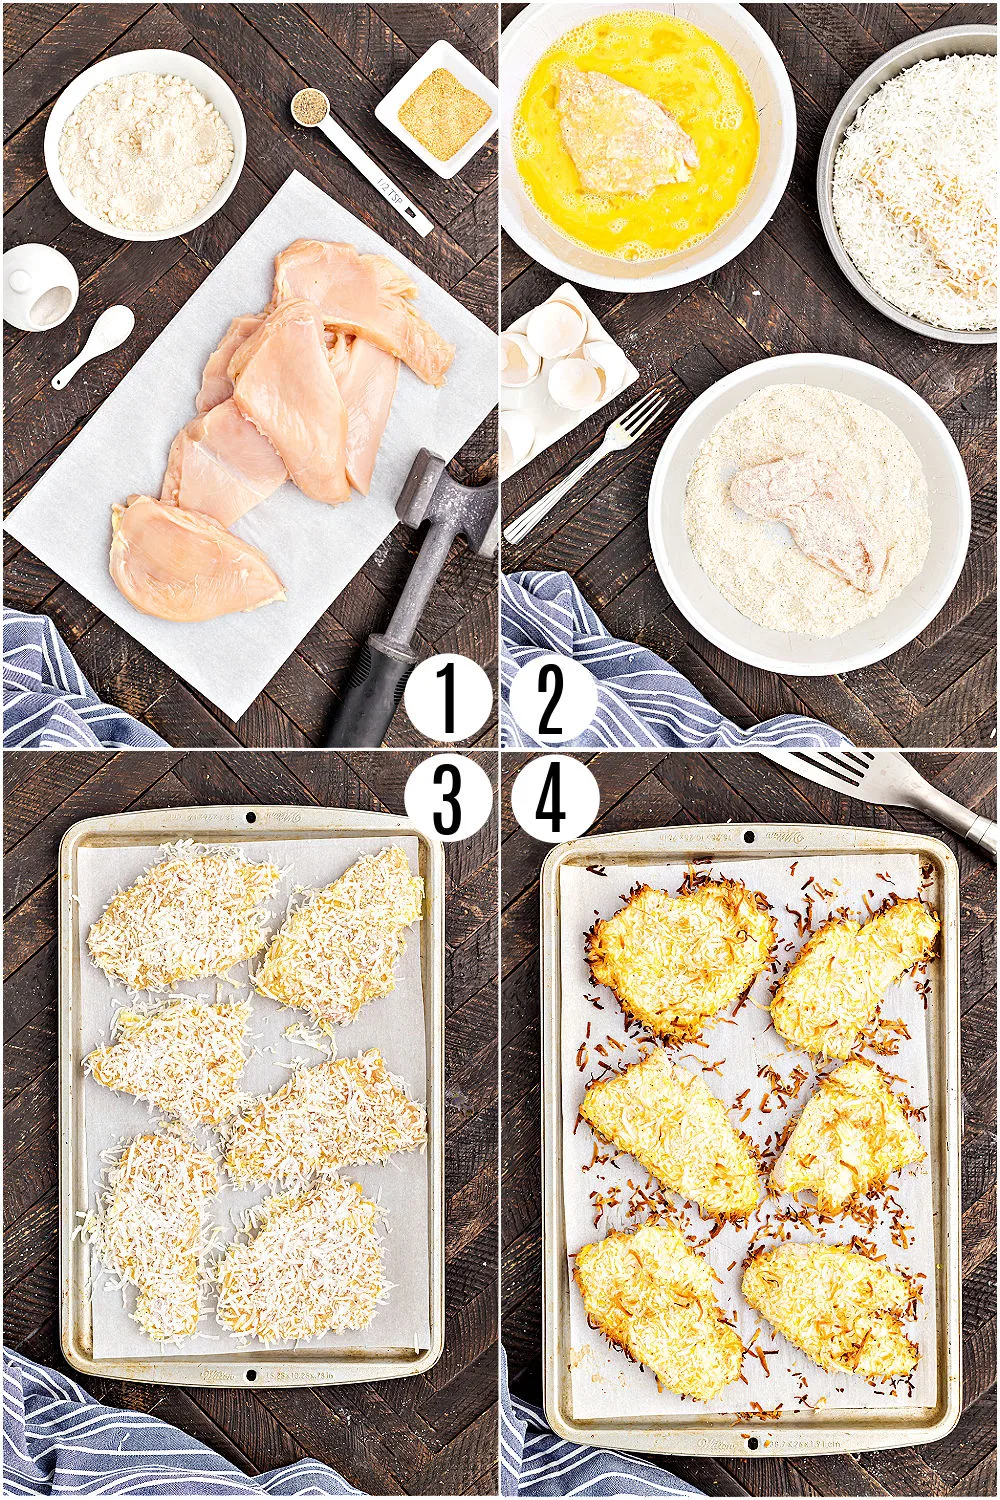 Step by step photos showing how to make oven baked coconut chicken.